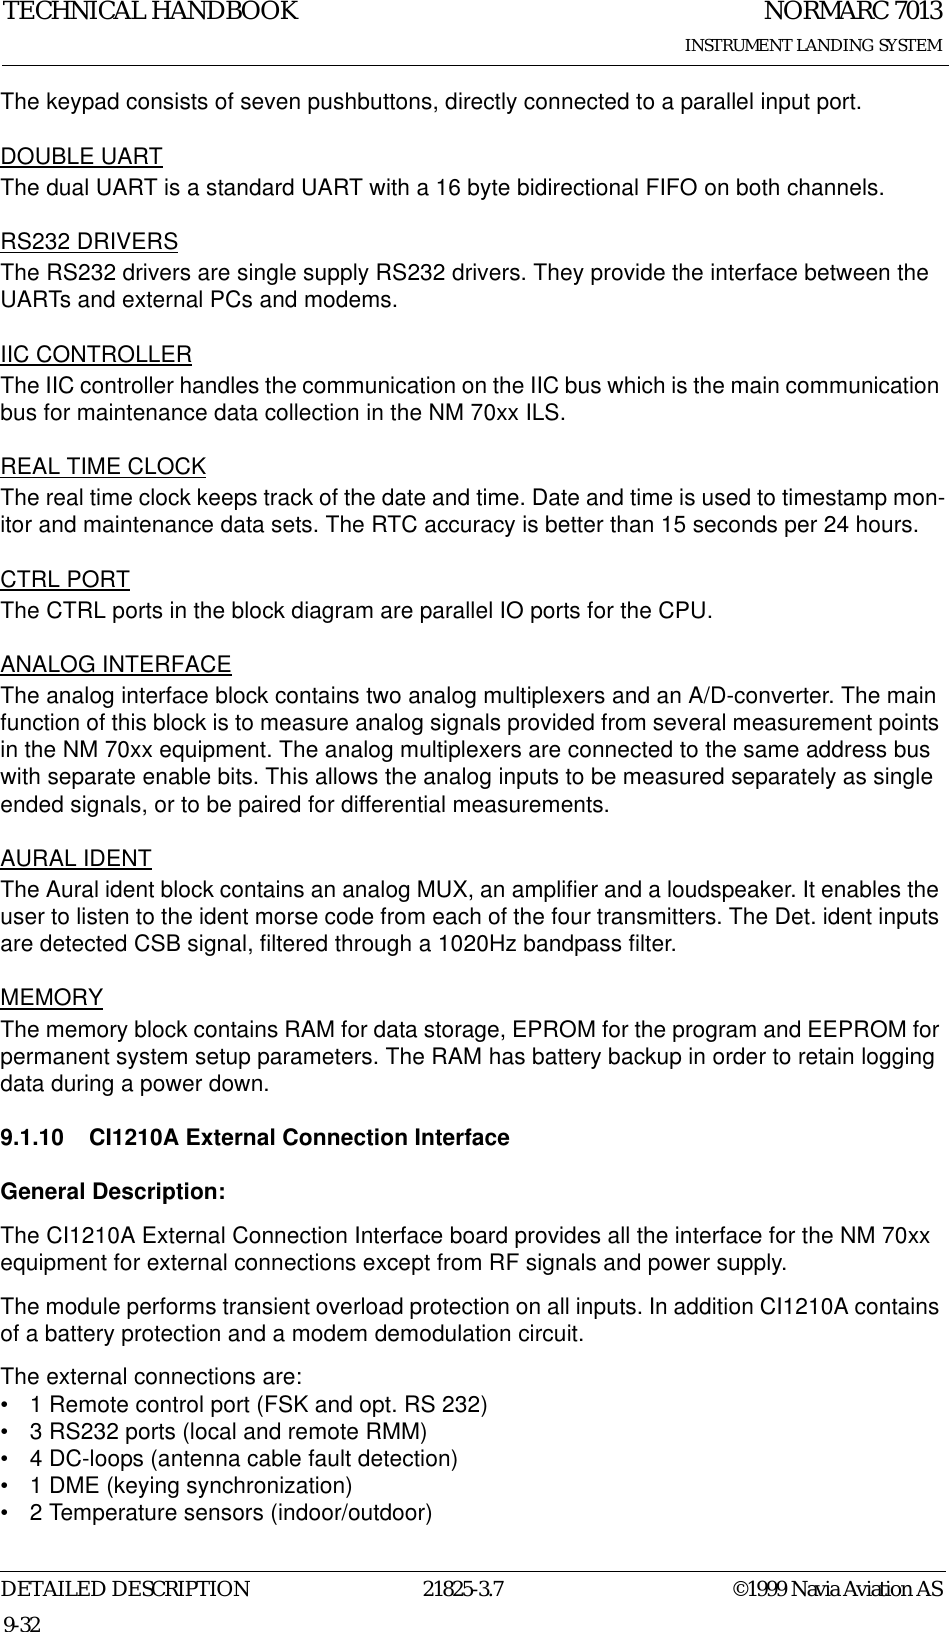 NORMARC 7013INSTRUMENT LANDING SYSTEMTECHNICAL HANDBOOKDETAILED DESCRIPTION 21825-3.7 ©1999 Navia Aviation AS9-32The keypad consists of seven pushbuttons, directly connected to a parallel input port.DOUBLE UARTThe dual UART is a standard UART with a 16 byte bidirectional FIFO on both channels.RS232 DRIVERSThe RS232 drivers are single supply RS232 drivers. They provide the interface between the UARTs and external PCs and modems.IIC CONTROLLERThe IIC controller handles the communication on the IIC bus which is the main communication bus for maintenance data collection in the NM 70xx ILS.REAL TIME CLOCKThe real time clock keeps track of the date and time. Date and time is used to timestamp mon-itor and maintenance data sets. The RTC accuracy is better than 15 seconds per 24 hours.CTRL PORTThe CTRL ports in the block diagram are parallel IO ports for the CPU.ANALOG INTERFACEThe analog interface block contains two analog multiplexers and an A/D-converter. The main function of this block is to measure analog signals provided from several measurement points in the NM 70xx equipment. The analog multiplexers are connected to the same address bus with separate enable bits. This allows the analog inputs to be measured separately as single ended signals, or to be paired for differential measurements. AURAL IDENTThe Aural ident block contains an analog MUX, an amplifier and a loudspeaker. It enables the user to listen to the ident morse code from each of the four transmitters. The Det. ident inputs are detected CSB signal, filtered through a 1020Hz bandpass filter.MEMORYThe memory block contains RAM for data storage, EPROM for the program and EEPROM for permanent system setup parameters. The RAM has battery backup in order to retain logging data during a power down.9.1.10 CI1210A External Connection InterfaceGeneral Description:The CI1210A External Connection Interface board provides all the interface for the NM 70xx equipment for external connections except from RF signals and power supply.The module performs transient overload protection on all inputs. In addition CI1210A contains of a battery protection and a modem demodulation circuit. The external connections are:• 1 Remote control port (FSK and opt. RS 232)• 3 RS232 ports (local and remote RMM)• 4 DC-loops (antenna cable fault detection)• 1 DME (keying synchronization)• 2 Temperature sensors (indoor/outdoor)